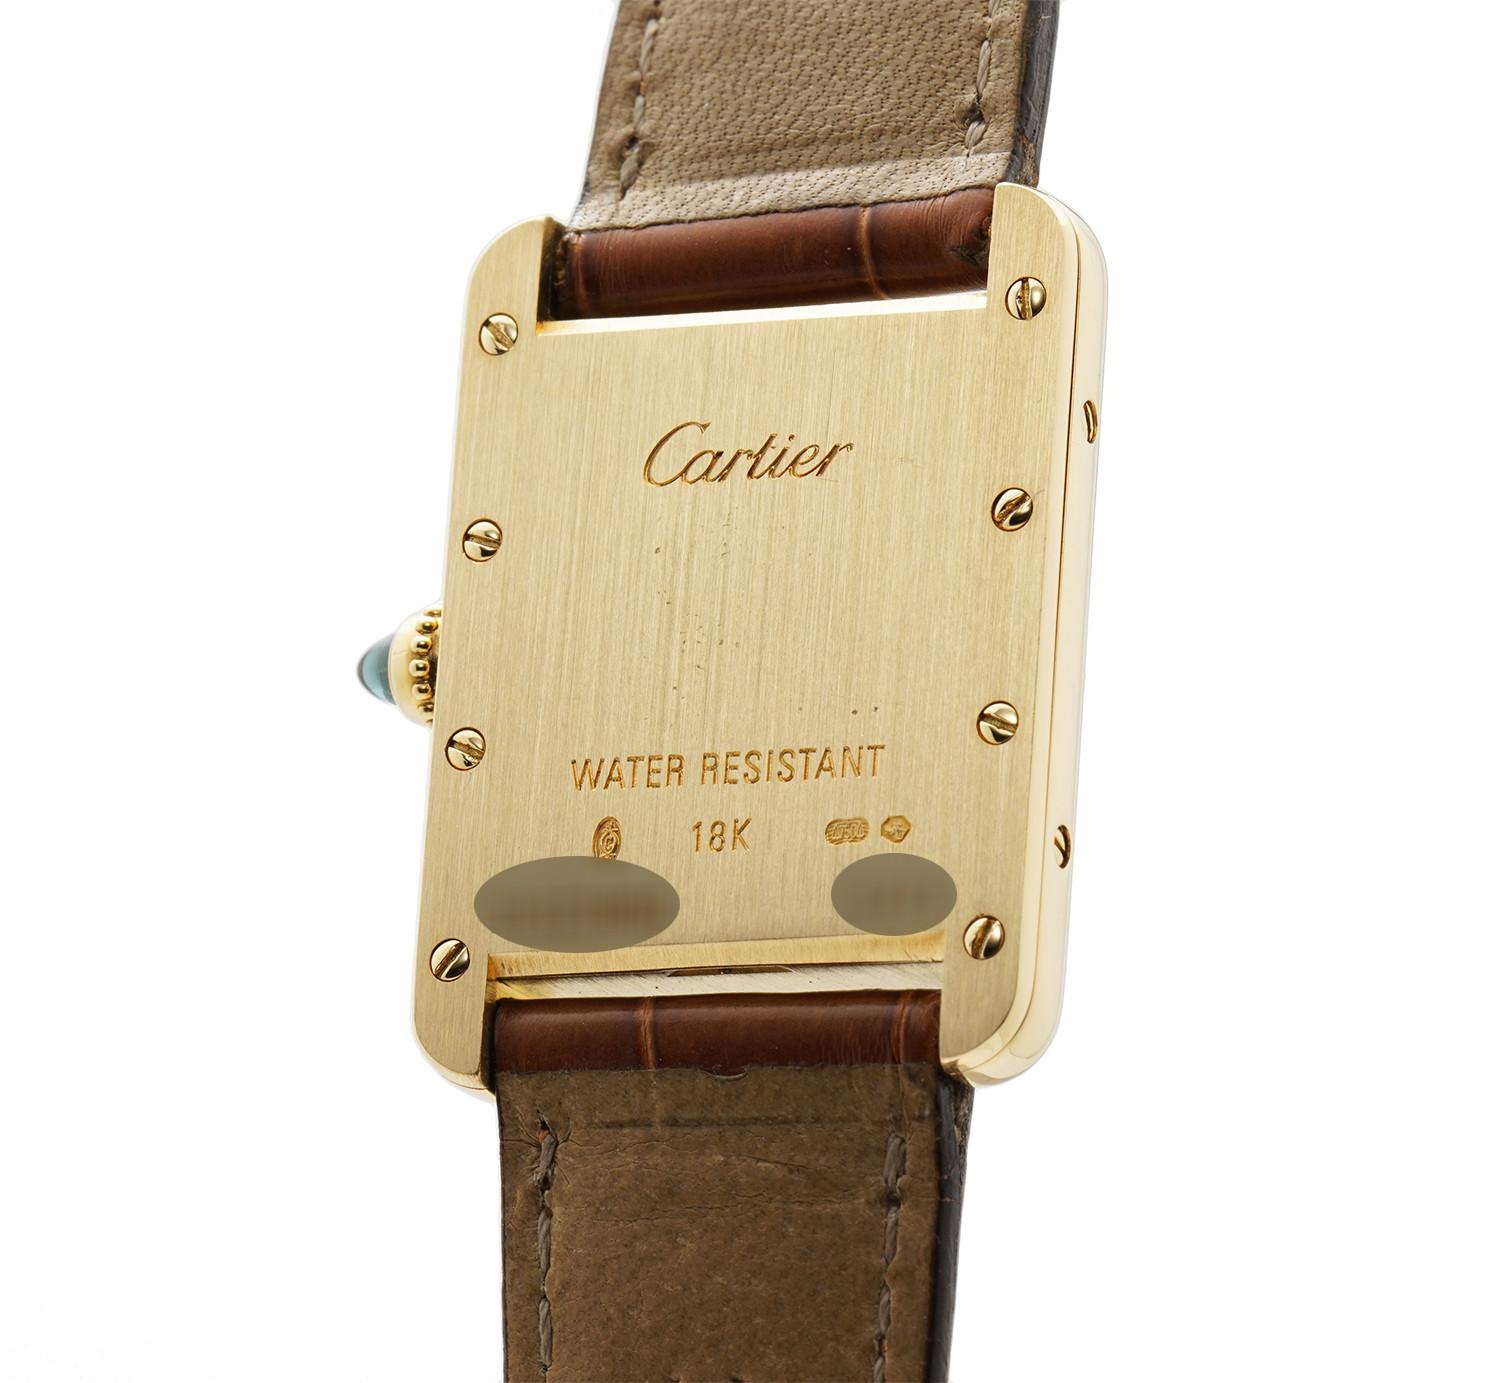 Cartier Tank Louis Cartier Reference #:W1529856. This Tank Louis Is iN Outstanding Condition For A Second-Hand Piece, No Signs Of Cosmetic Damage. Please Refer To The Pictures iN Determining The Condition, Pictures Are Of The Exact Watch Being